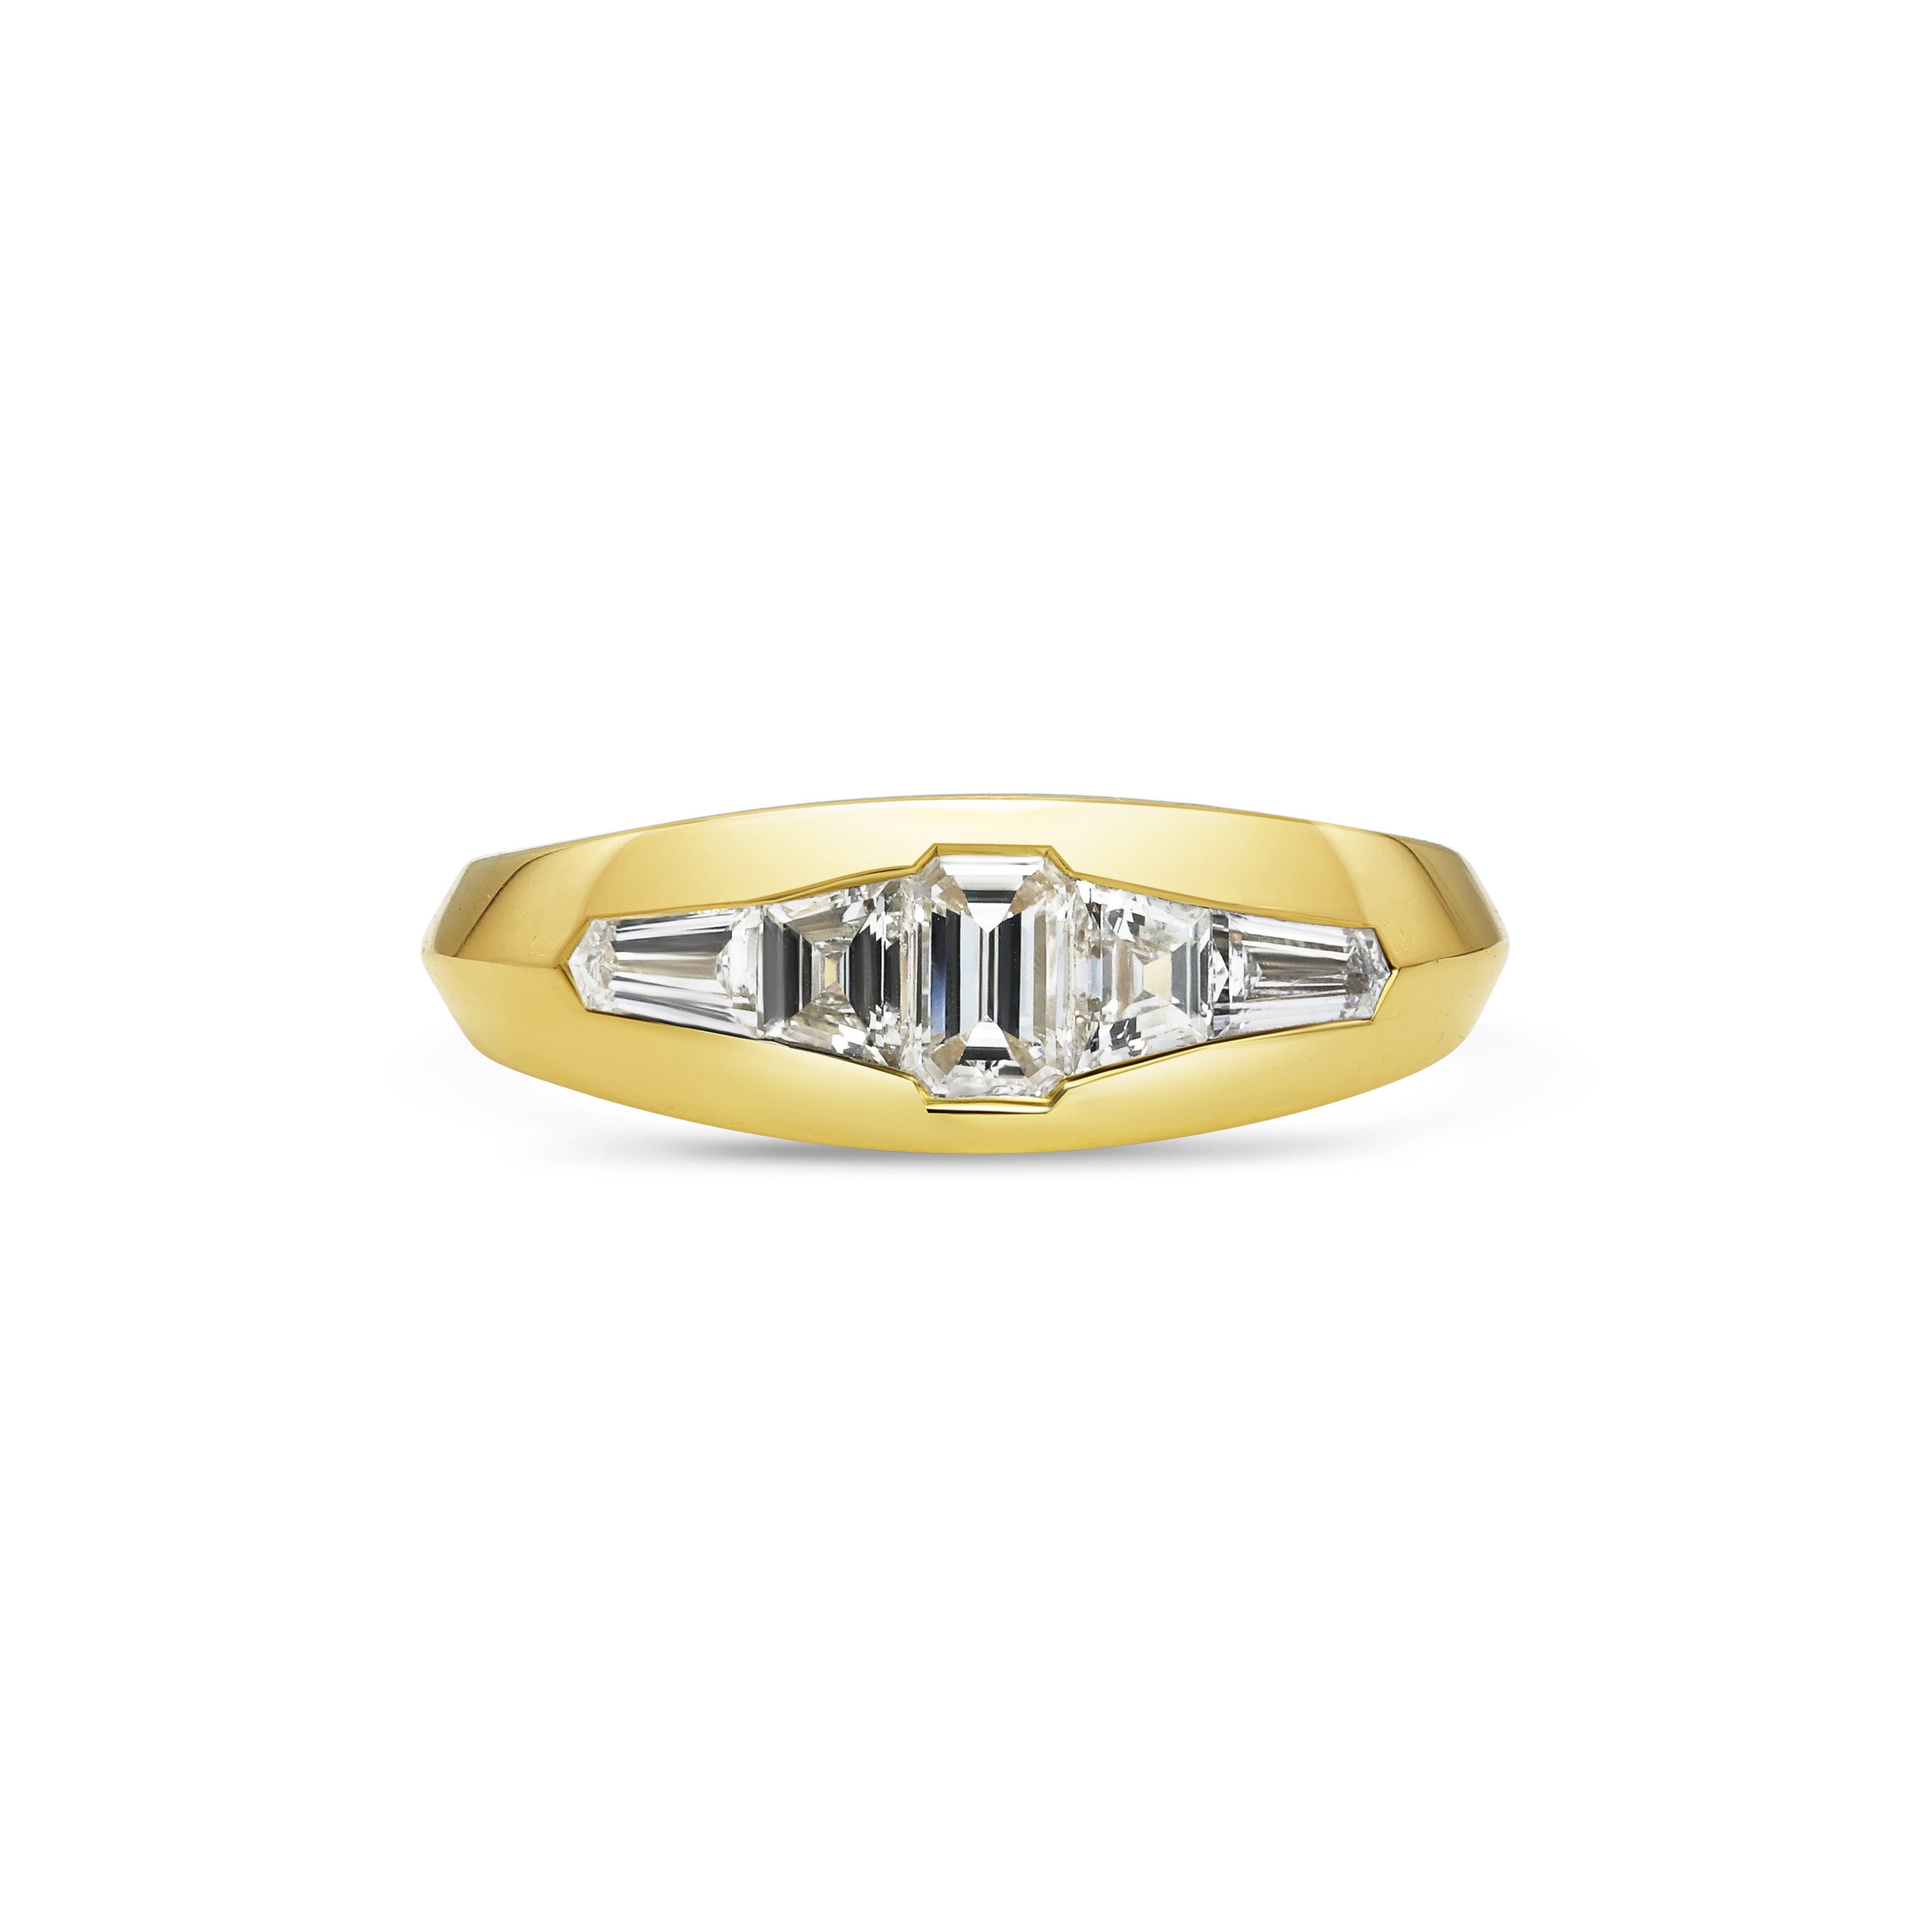 The Hedone Ring by East London jeweller Rachel Boston | Discover our collections of unique and timeless engagement rings, wedding rings, and modern fine jewellery.